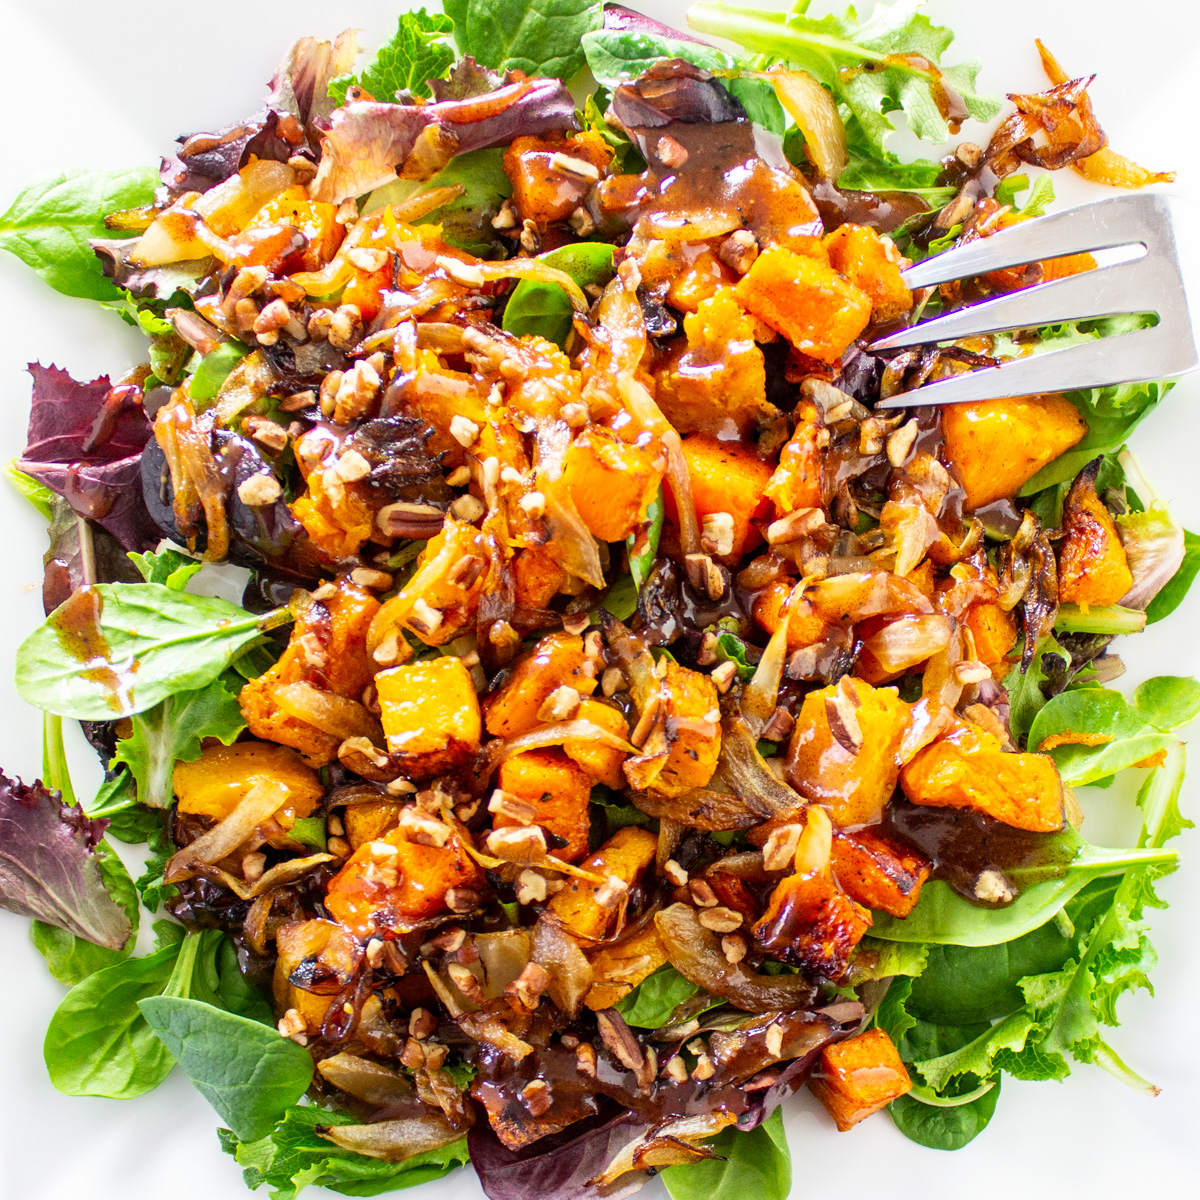 butternut squash salad with caramelized onions over greens on plate.